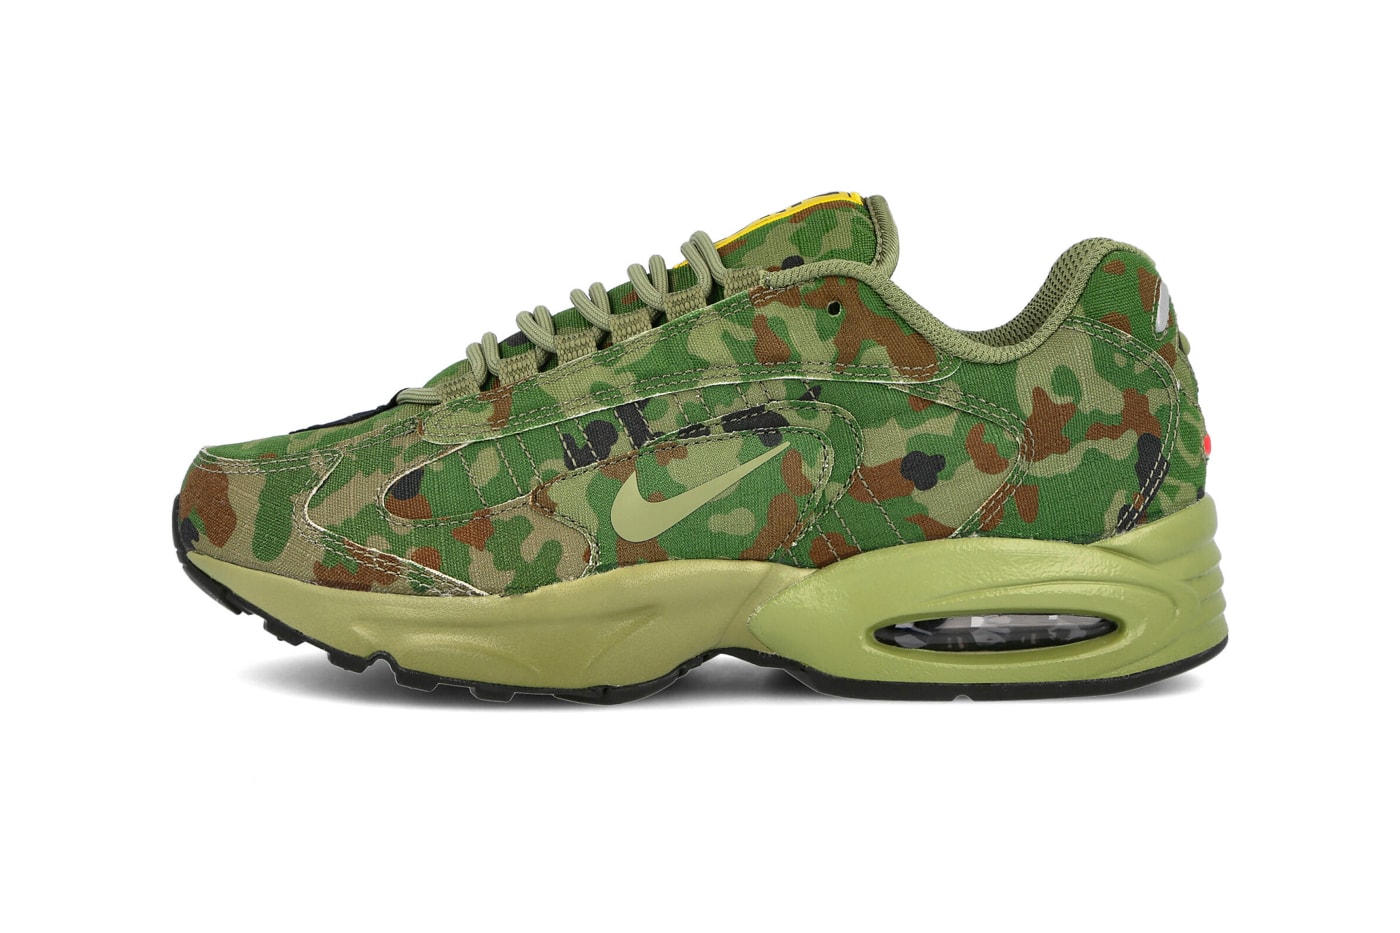 Nike Air Max Triax 96 SP Safari Thermal Green LT Chocolate Black frogskin camo CT5543 300 menswear streetwear shoes sneakers trainers runners spring summer 2020 collection